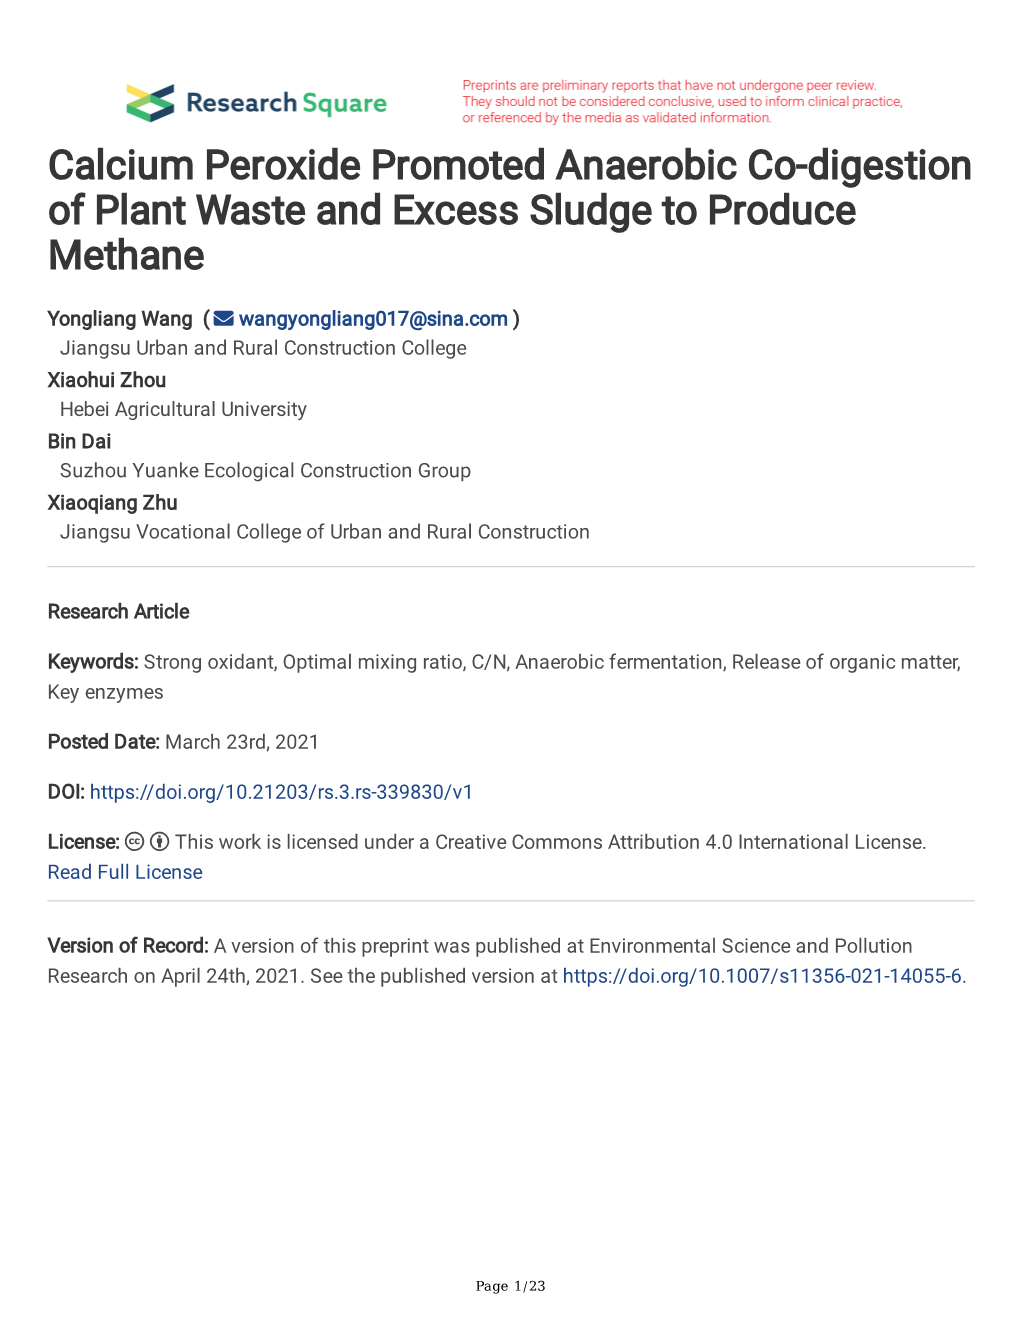 Calcium Peroxide Promoted Anaerobic Co-Digestion of Plant Waste and Excess Sludge to Produce Methane